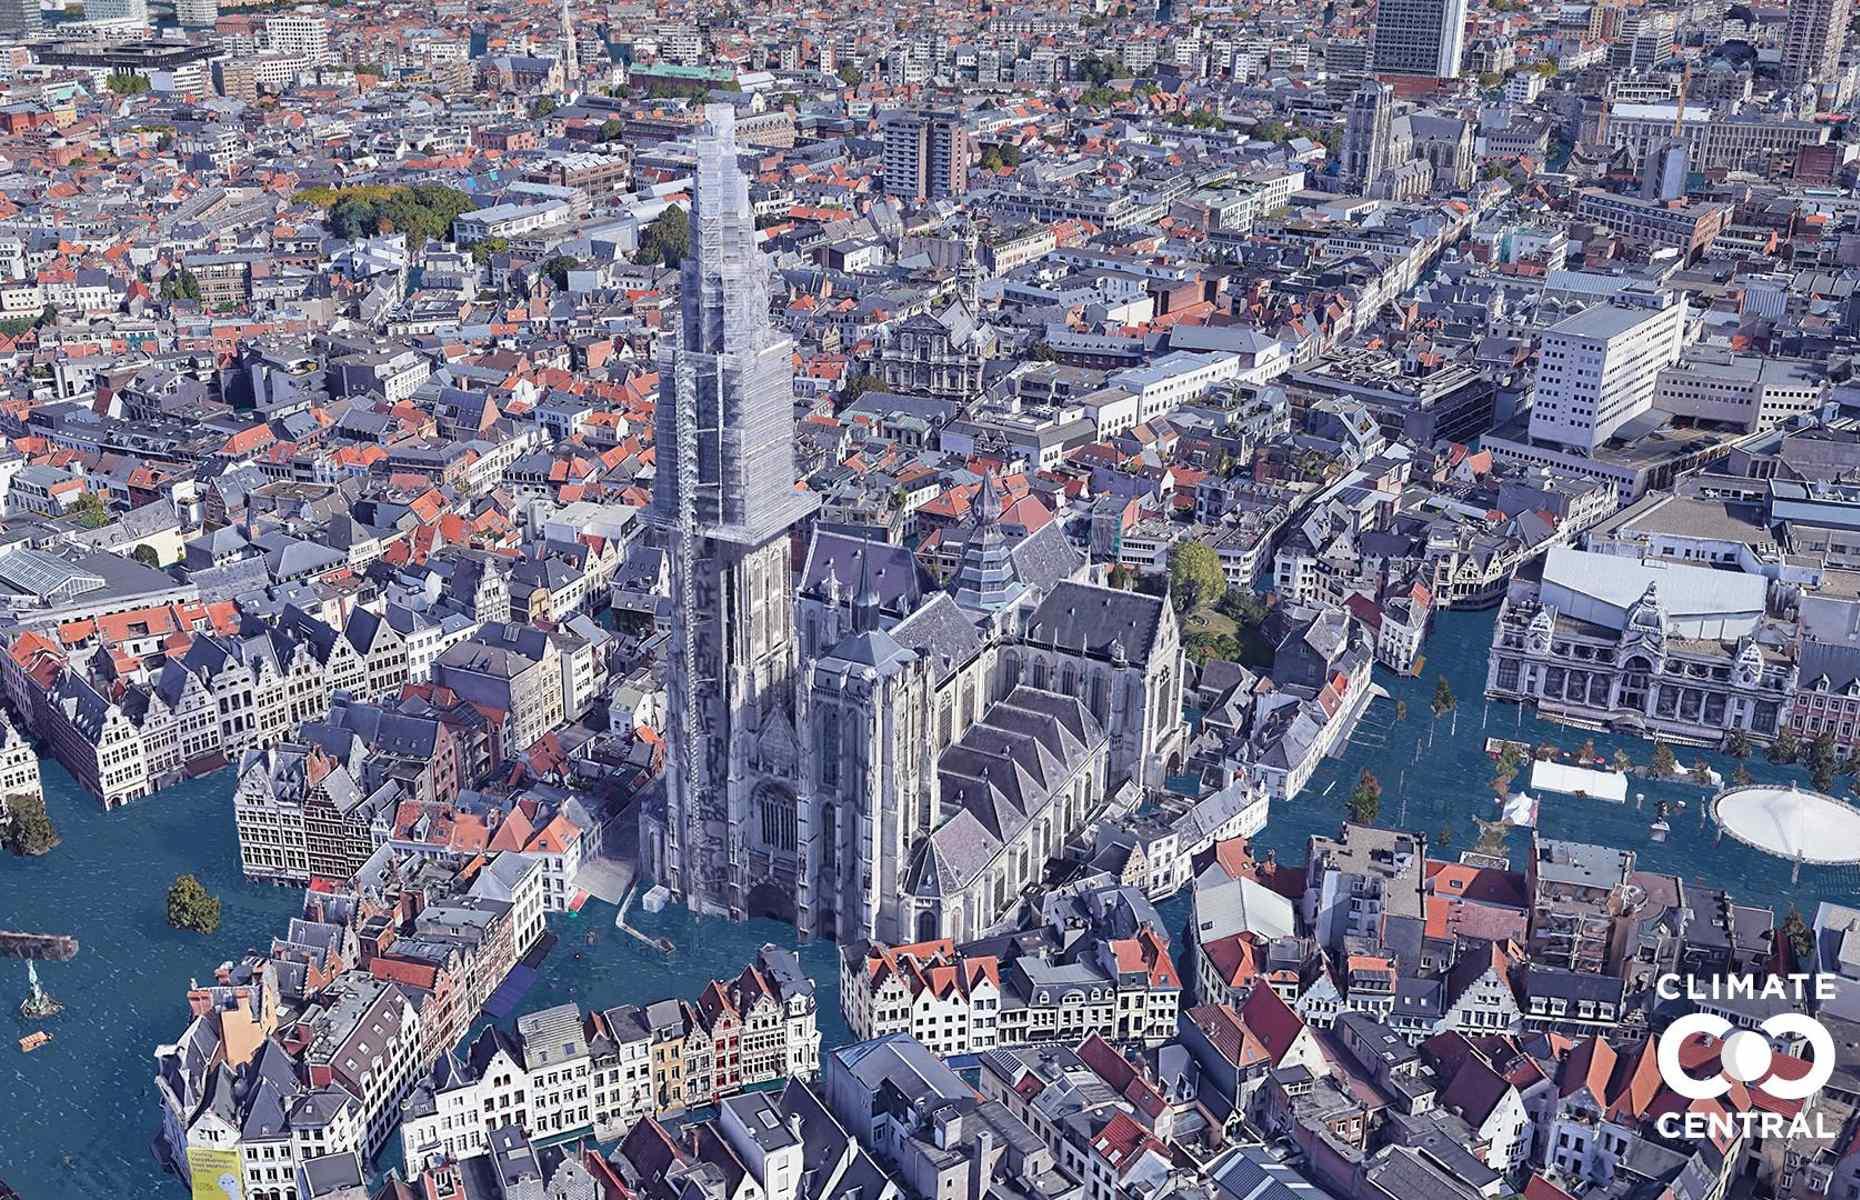 Antwerp’s position on the banks of the River Scheldt makes it especially vulnerable to sea level rise. Shown here, the 16th-century Cathedral of our Lady and the historic city centre could become badly flooded if climate change continues at its current rate.